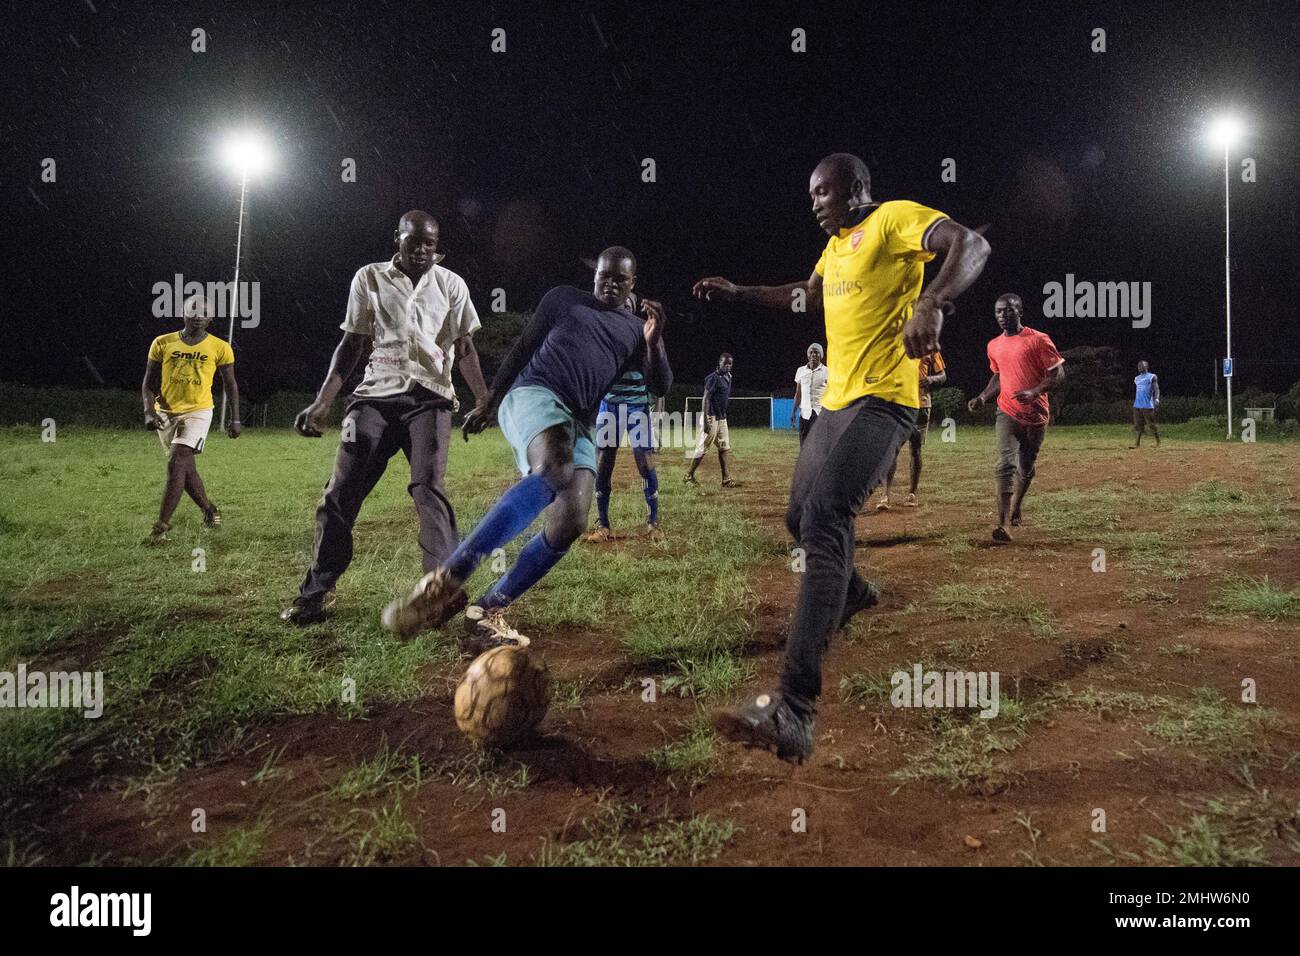 IMAGE DISTRIBUTED FOR PHILIPS - Thousands of footballers across Africa,  Asia and Latin America can now play after dark thanks to innovative solar  LED floodlights provided by Philips Lighting, a Royal Philips (